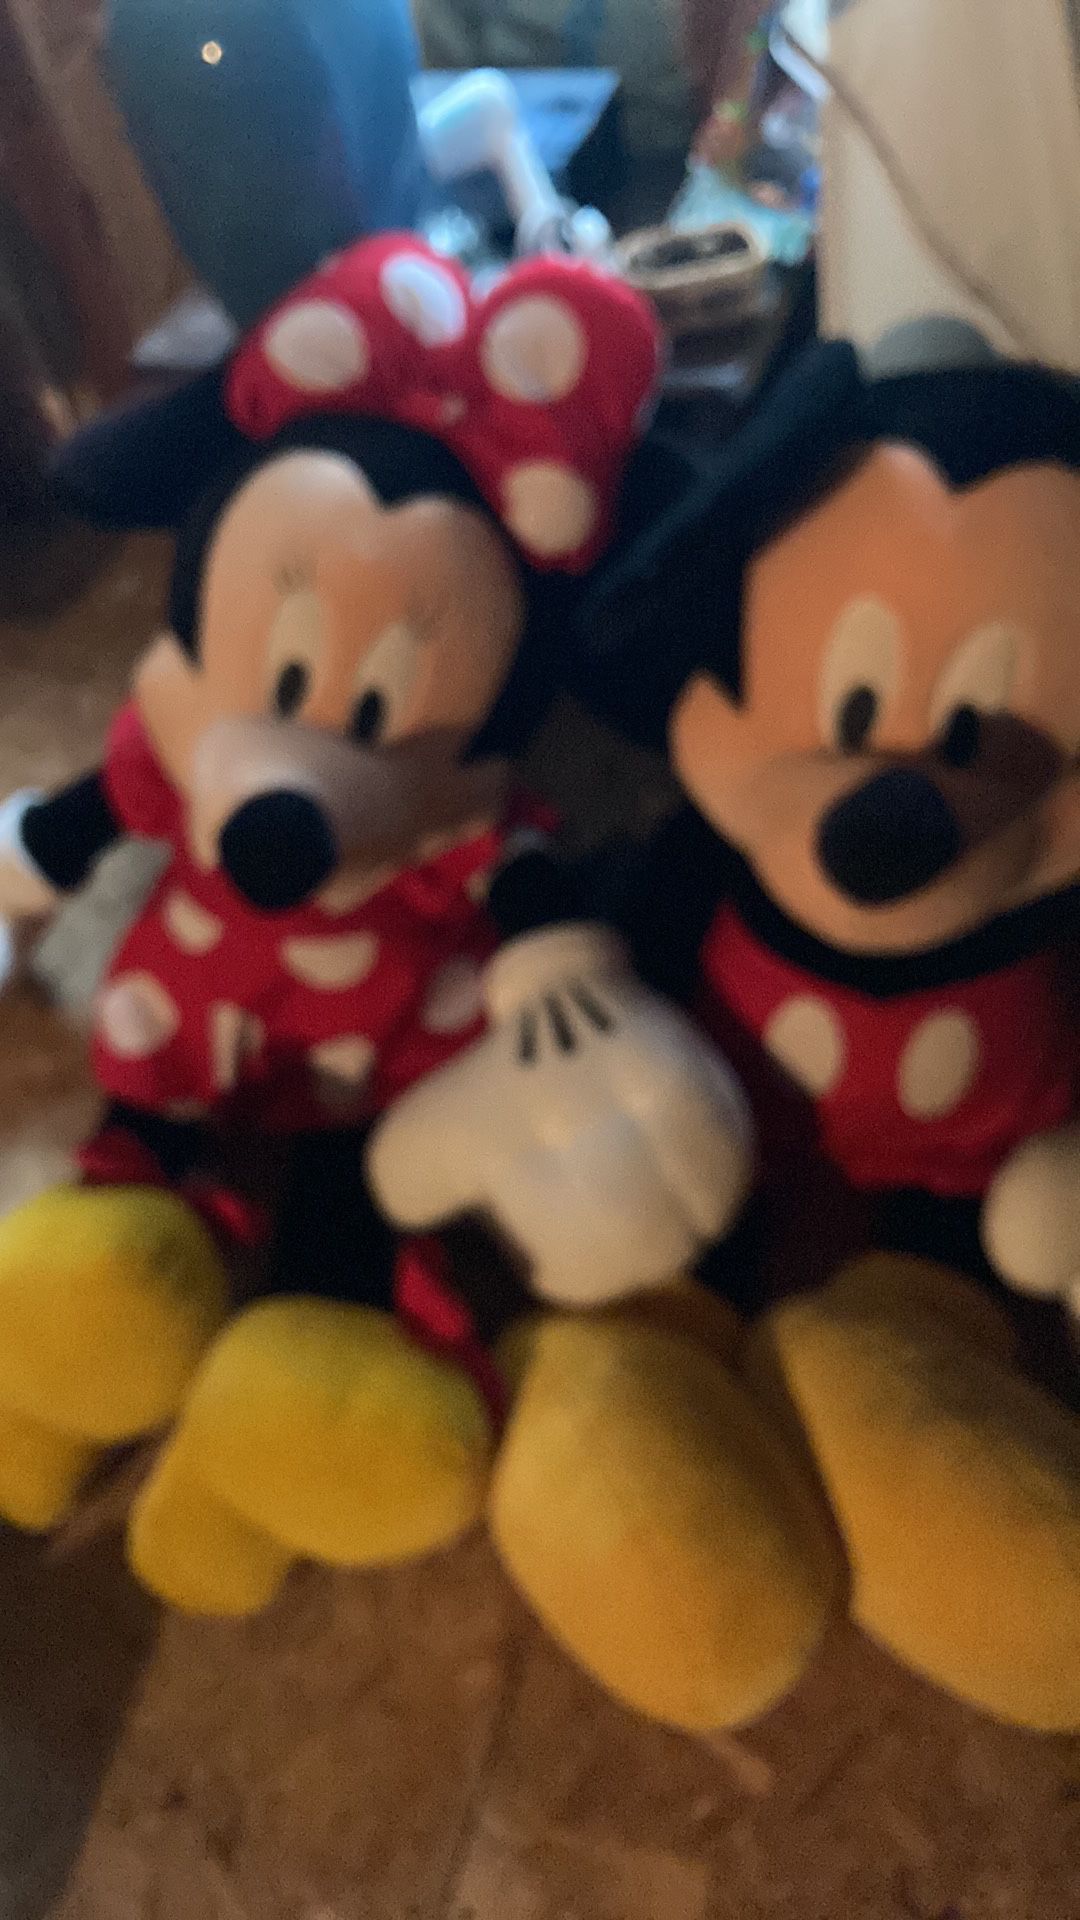 Gigantic Mickey and Minnie mouse Plush